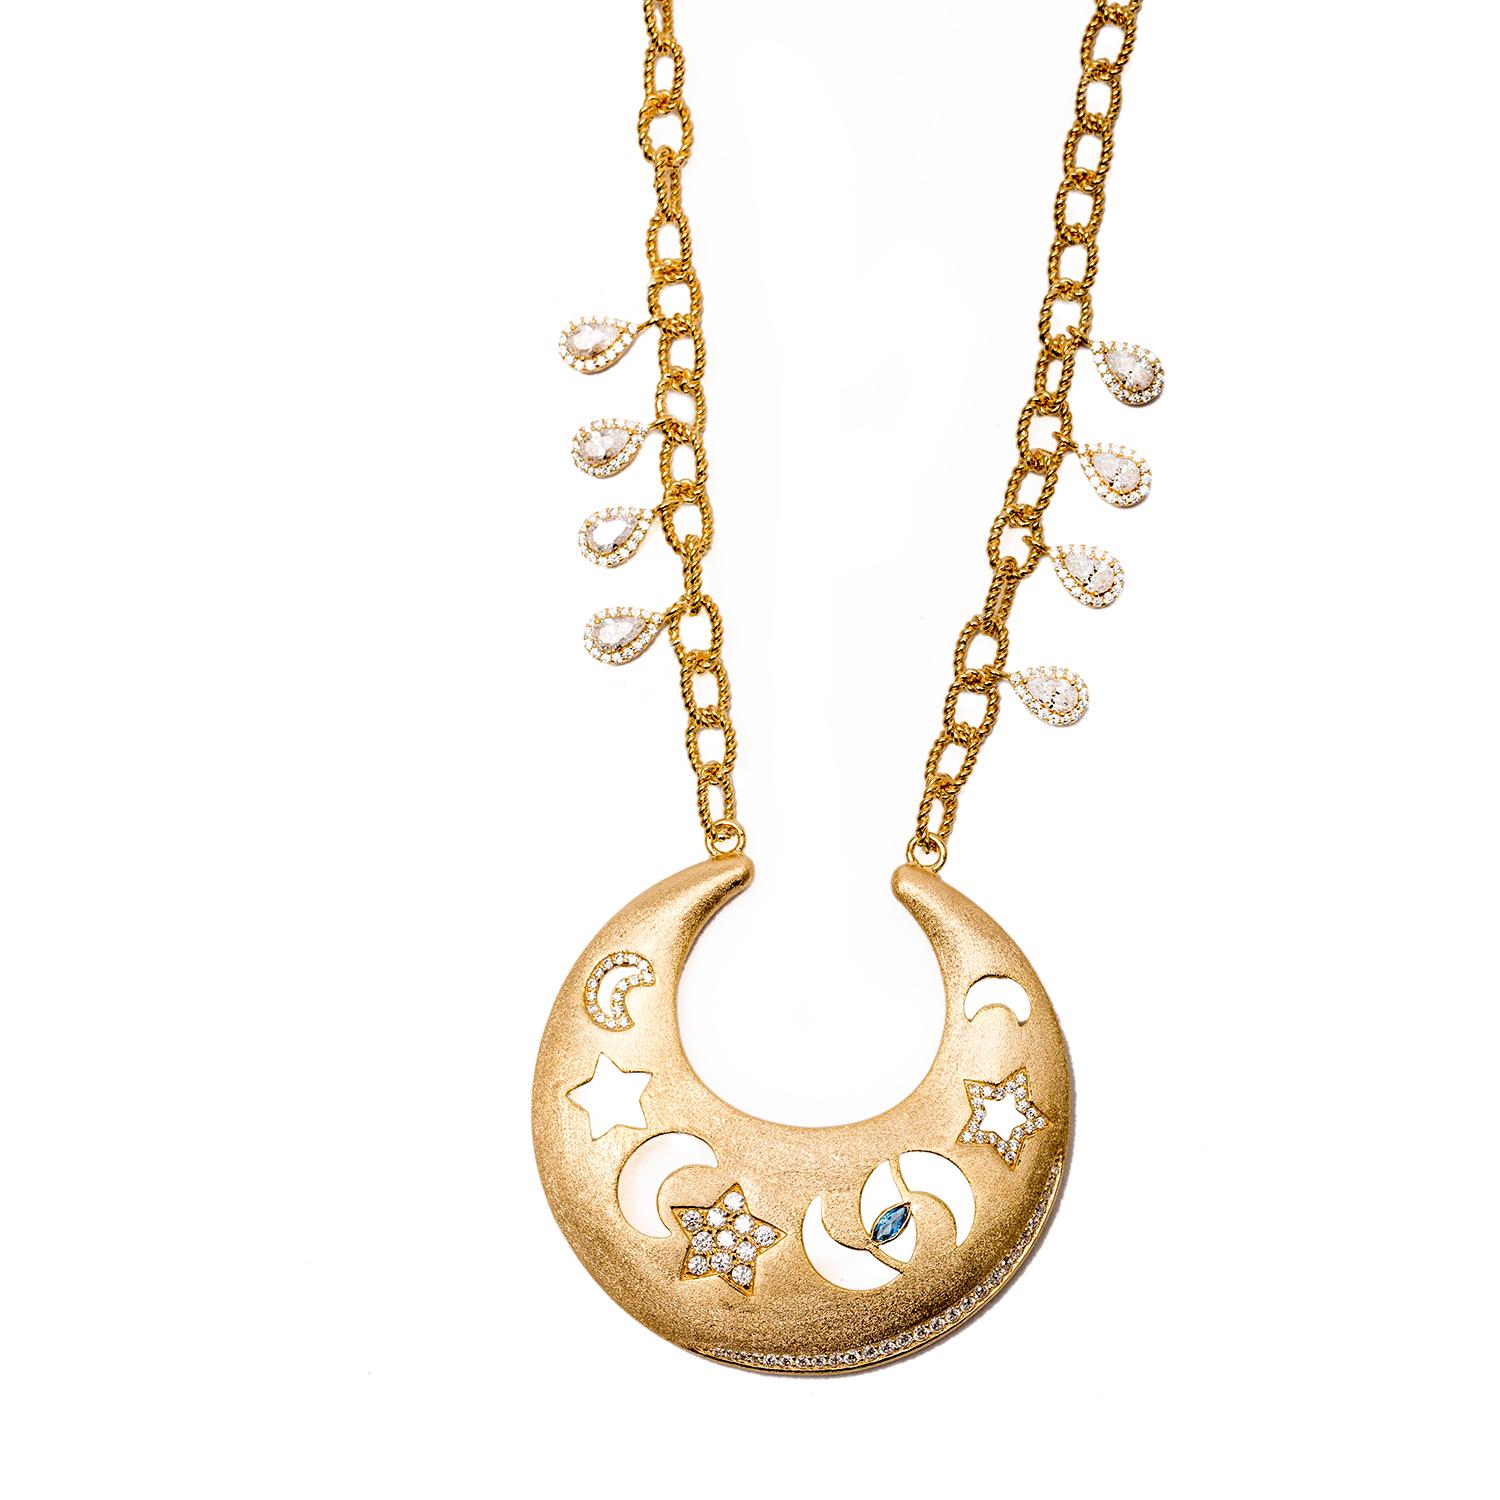 A gorgeous take on the sky, Sa'mma, the universal blanket the covers mankind and connects us all. Hand carved necklace with moons, stars and a protective eye that watches over us all. Sterling silver base with 18k gold plating, vermeil gold, with